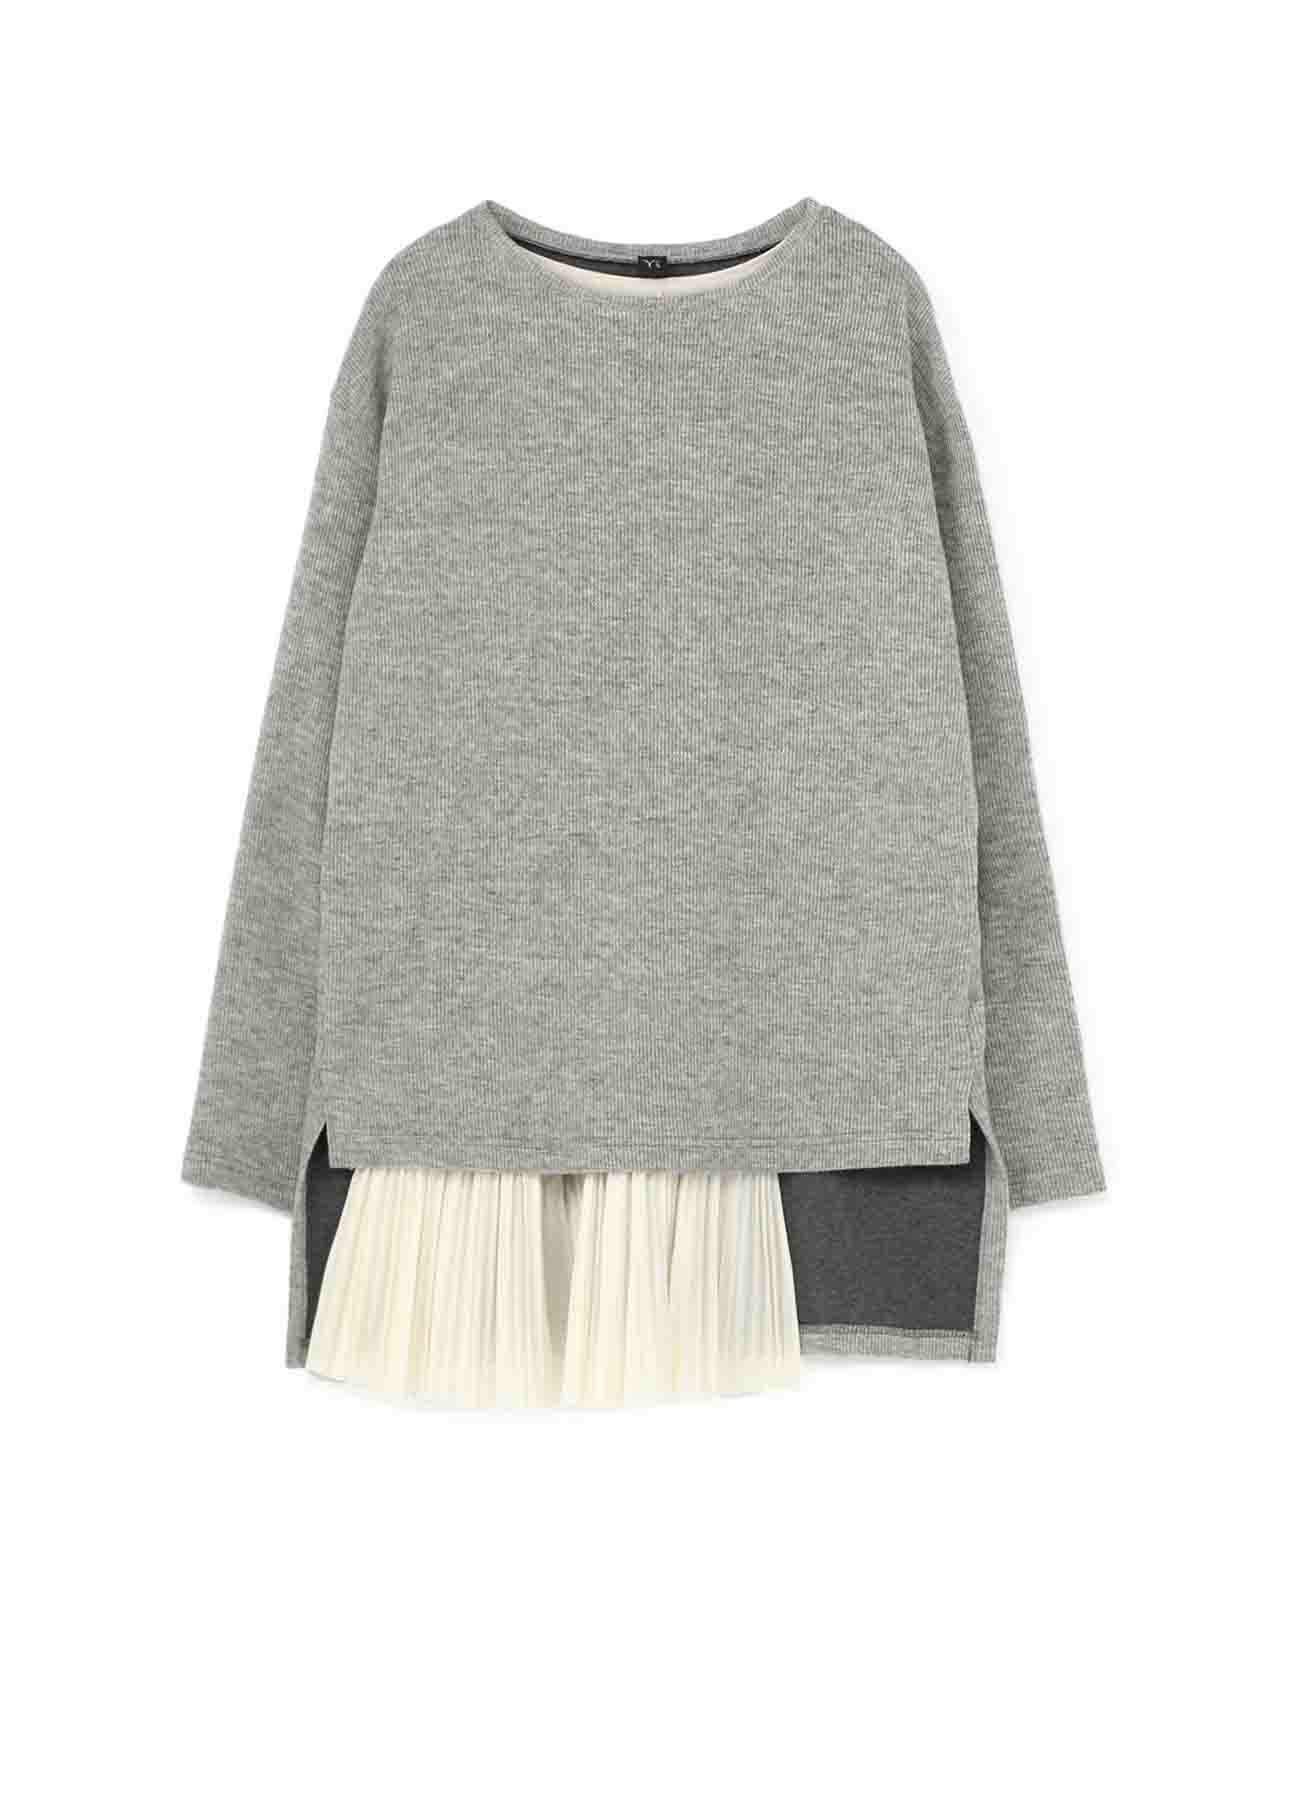 DOUBLE FACE PLEATS PULLOVER